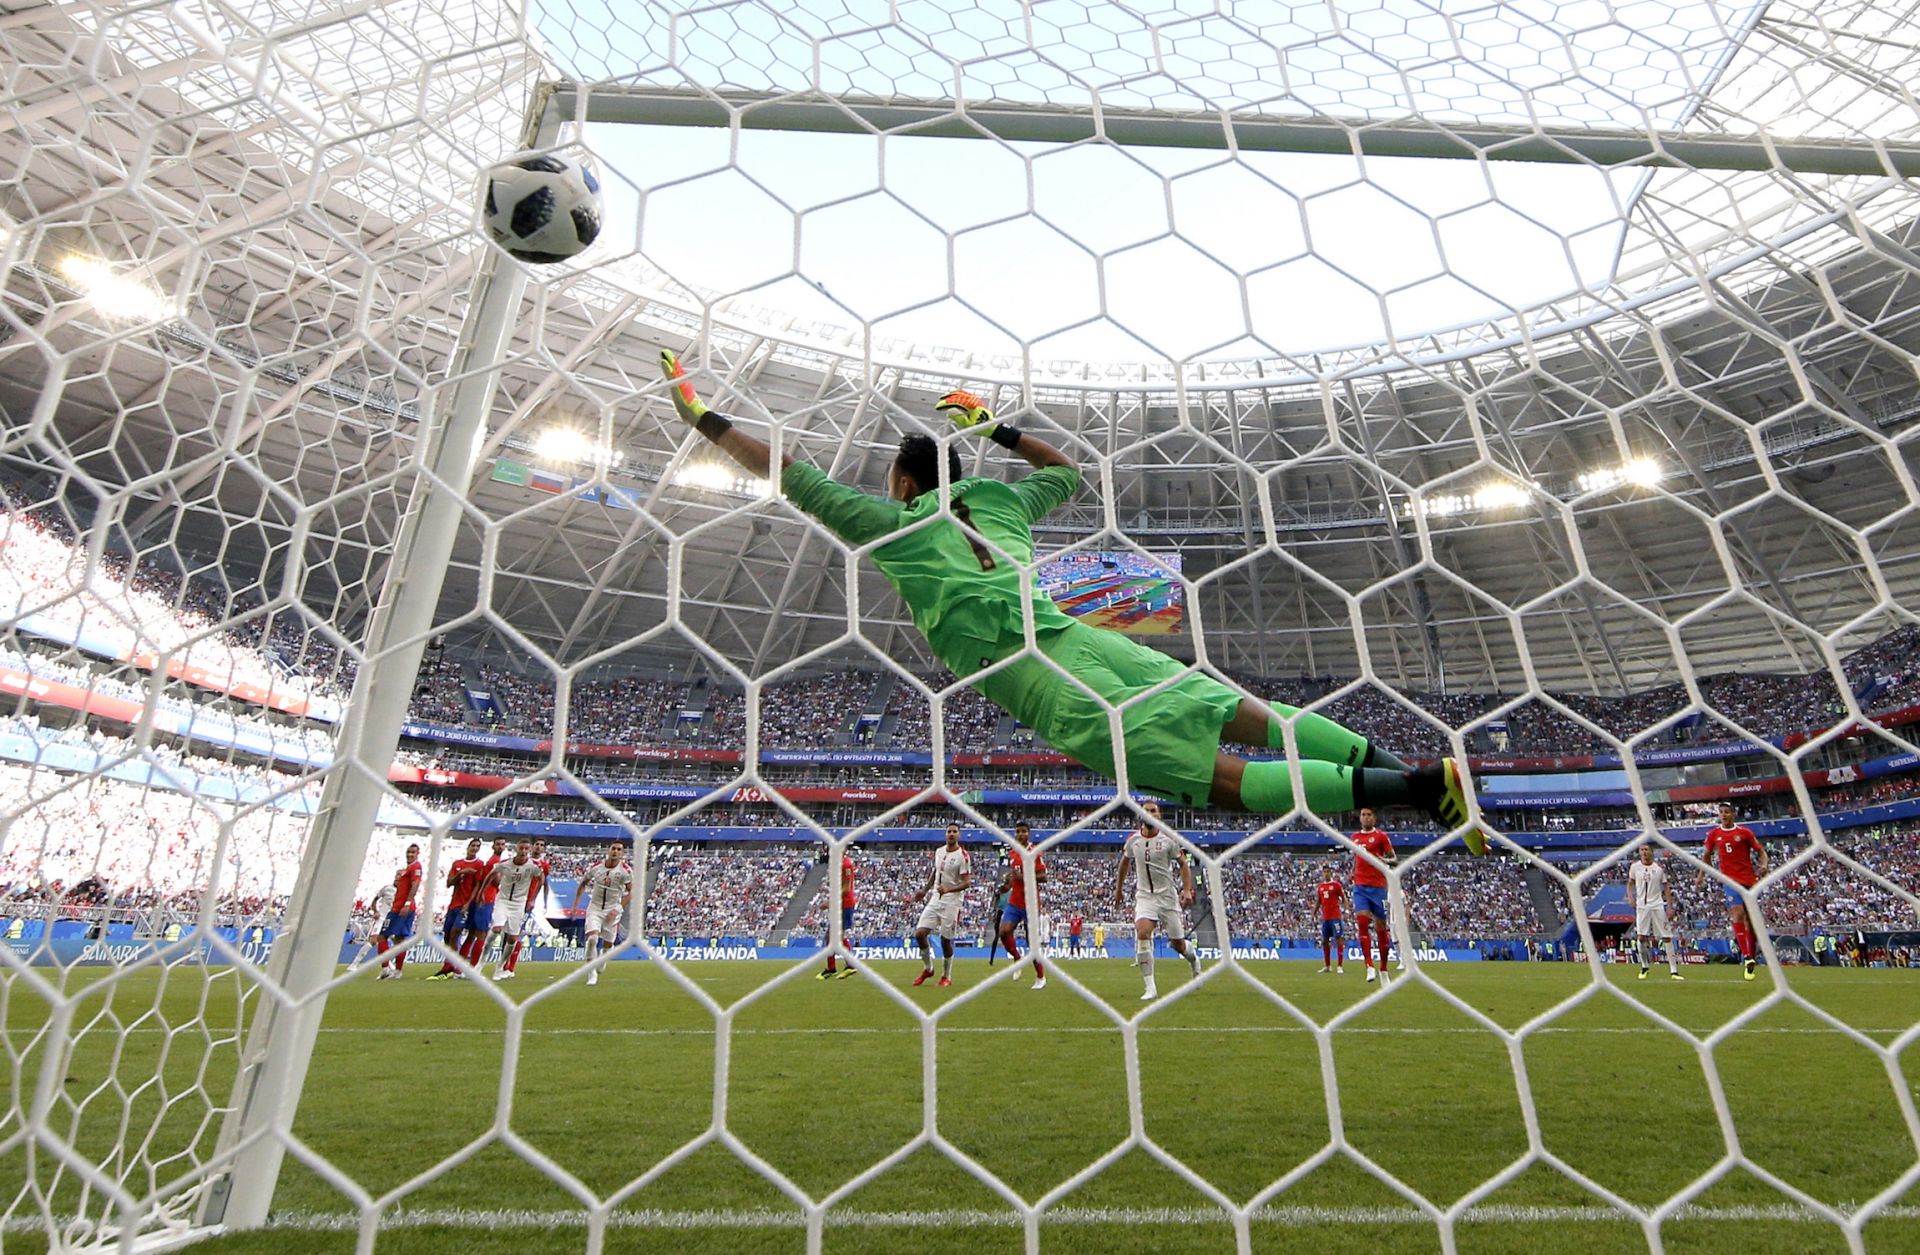 Keylor Navas, a goalkeeper for Costa Rica's national soccer team, tries to block a shot in a match against Serbia during the 2018 World Cup.